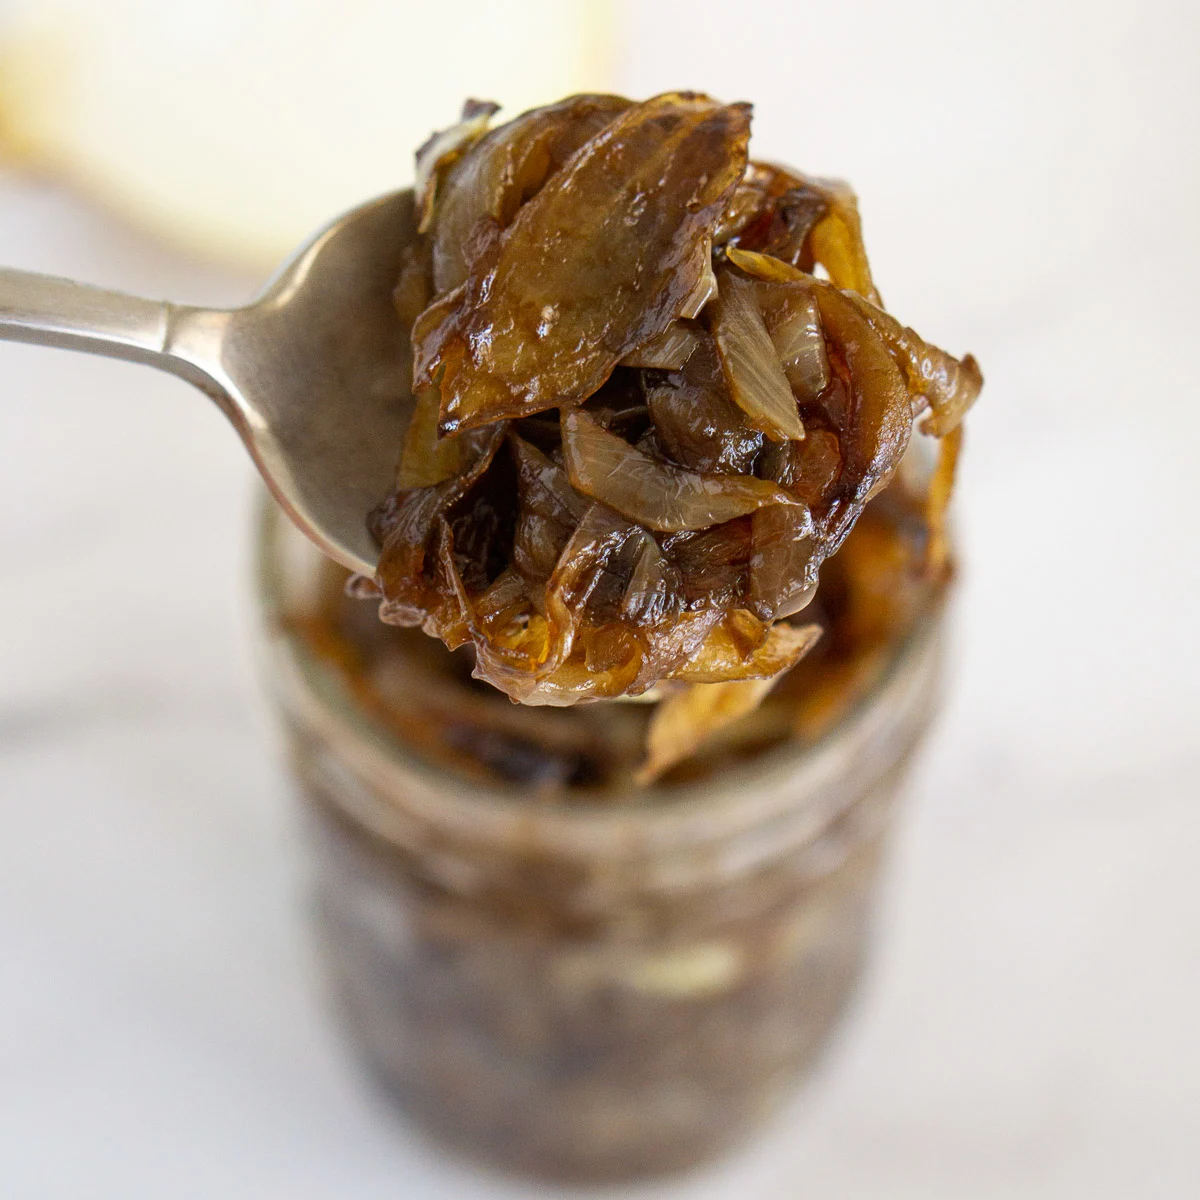 balsamic caramelized onion in a jar